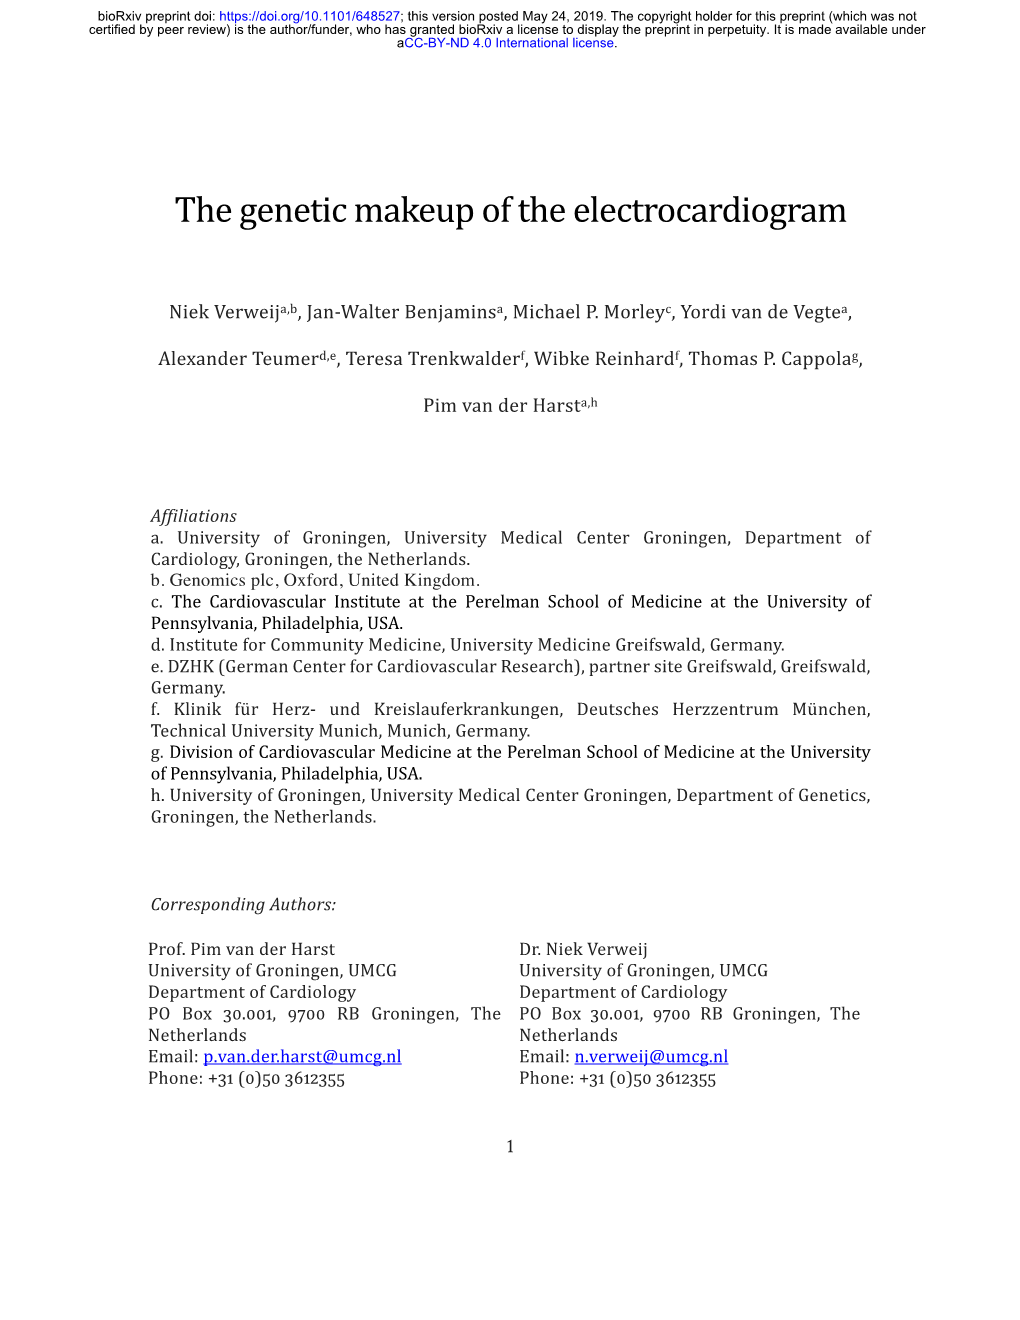 The Genetic Makeup of the Electrocardiogram